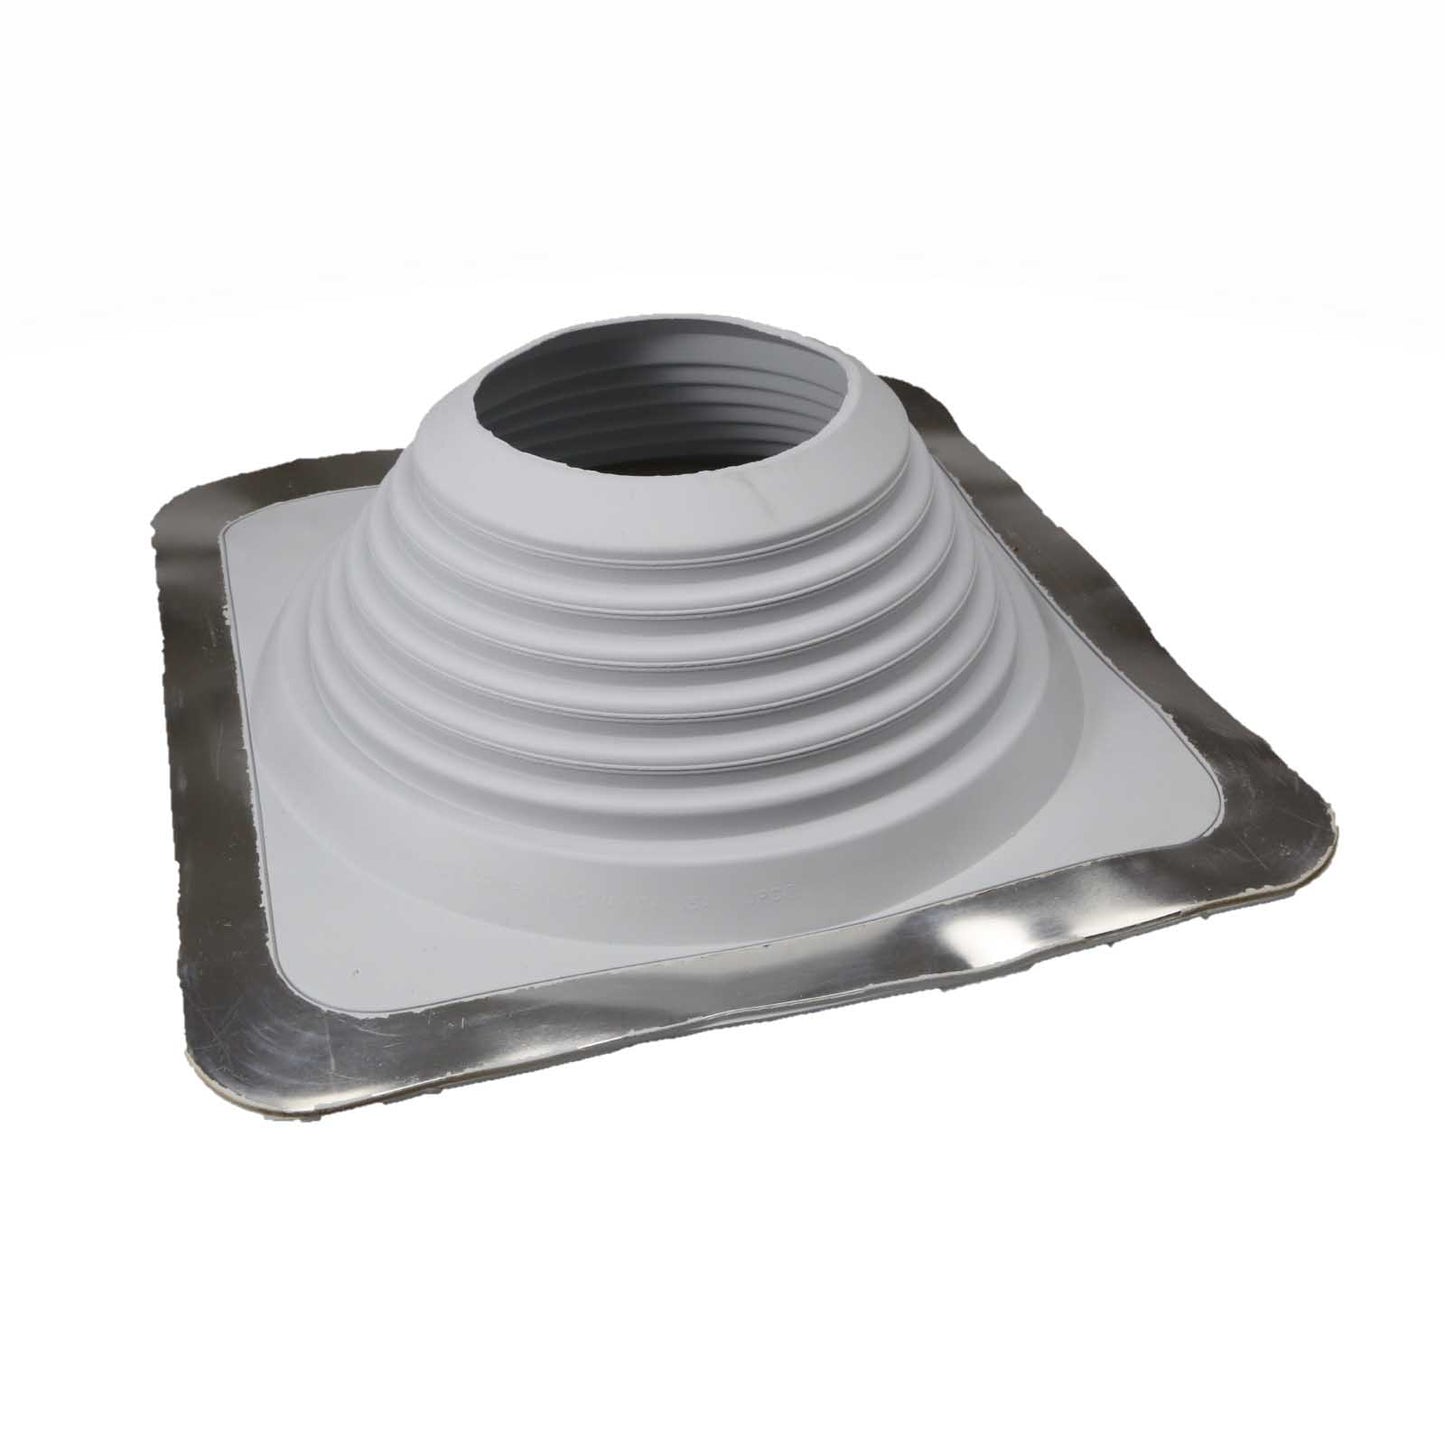 #9 Roofjack Square EPDM Pipe Flashing Boot Gray